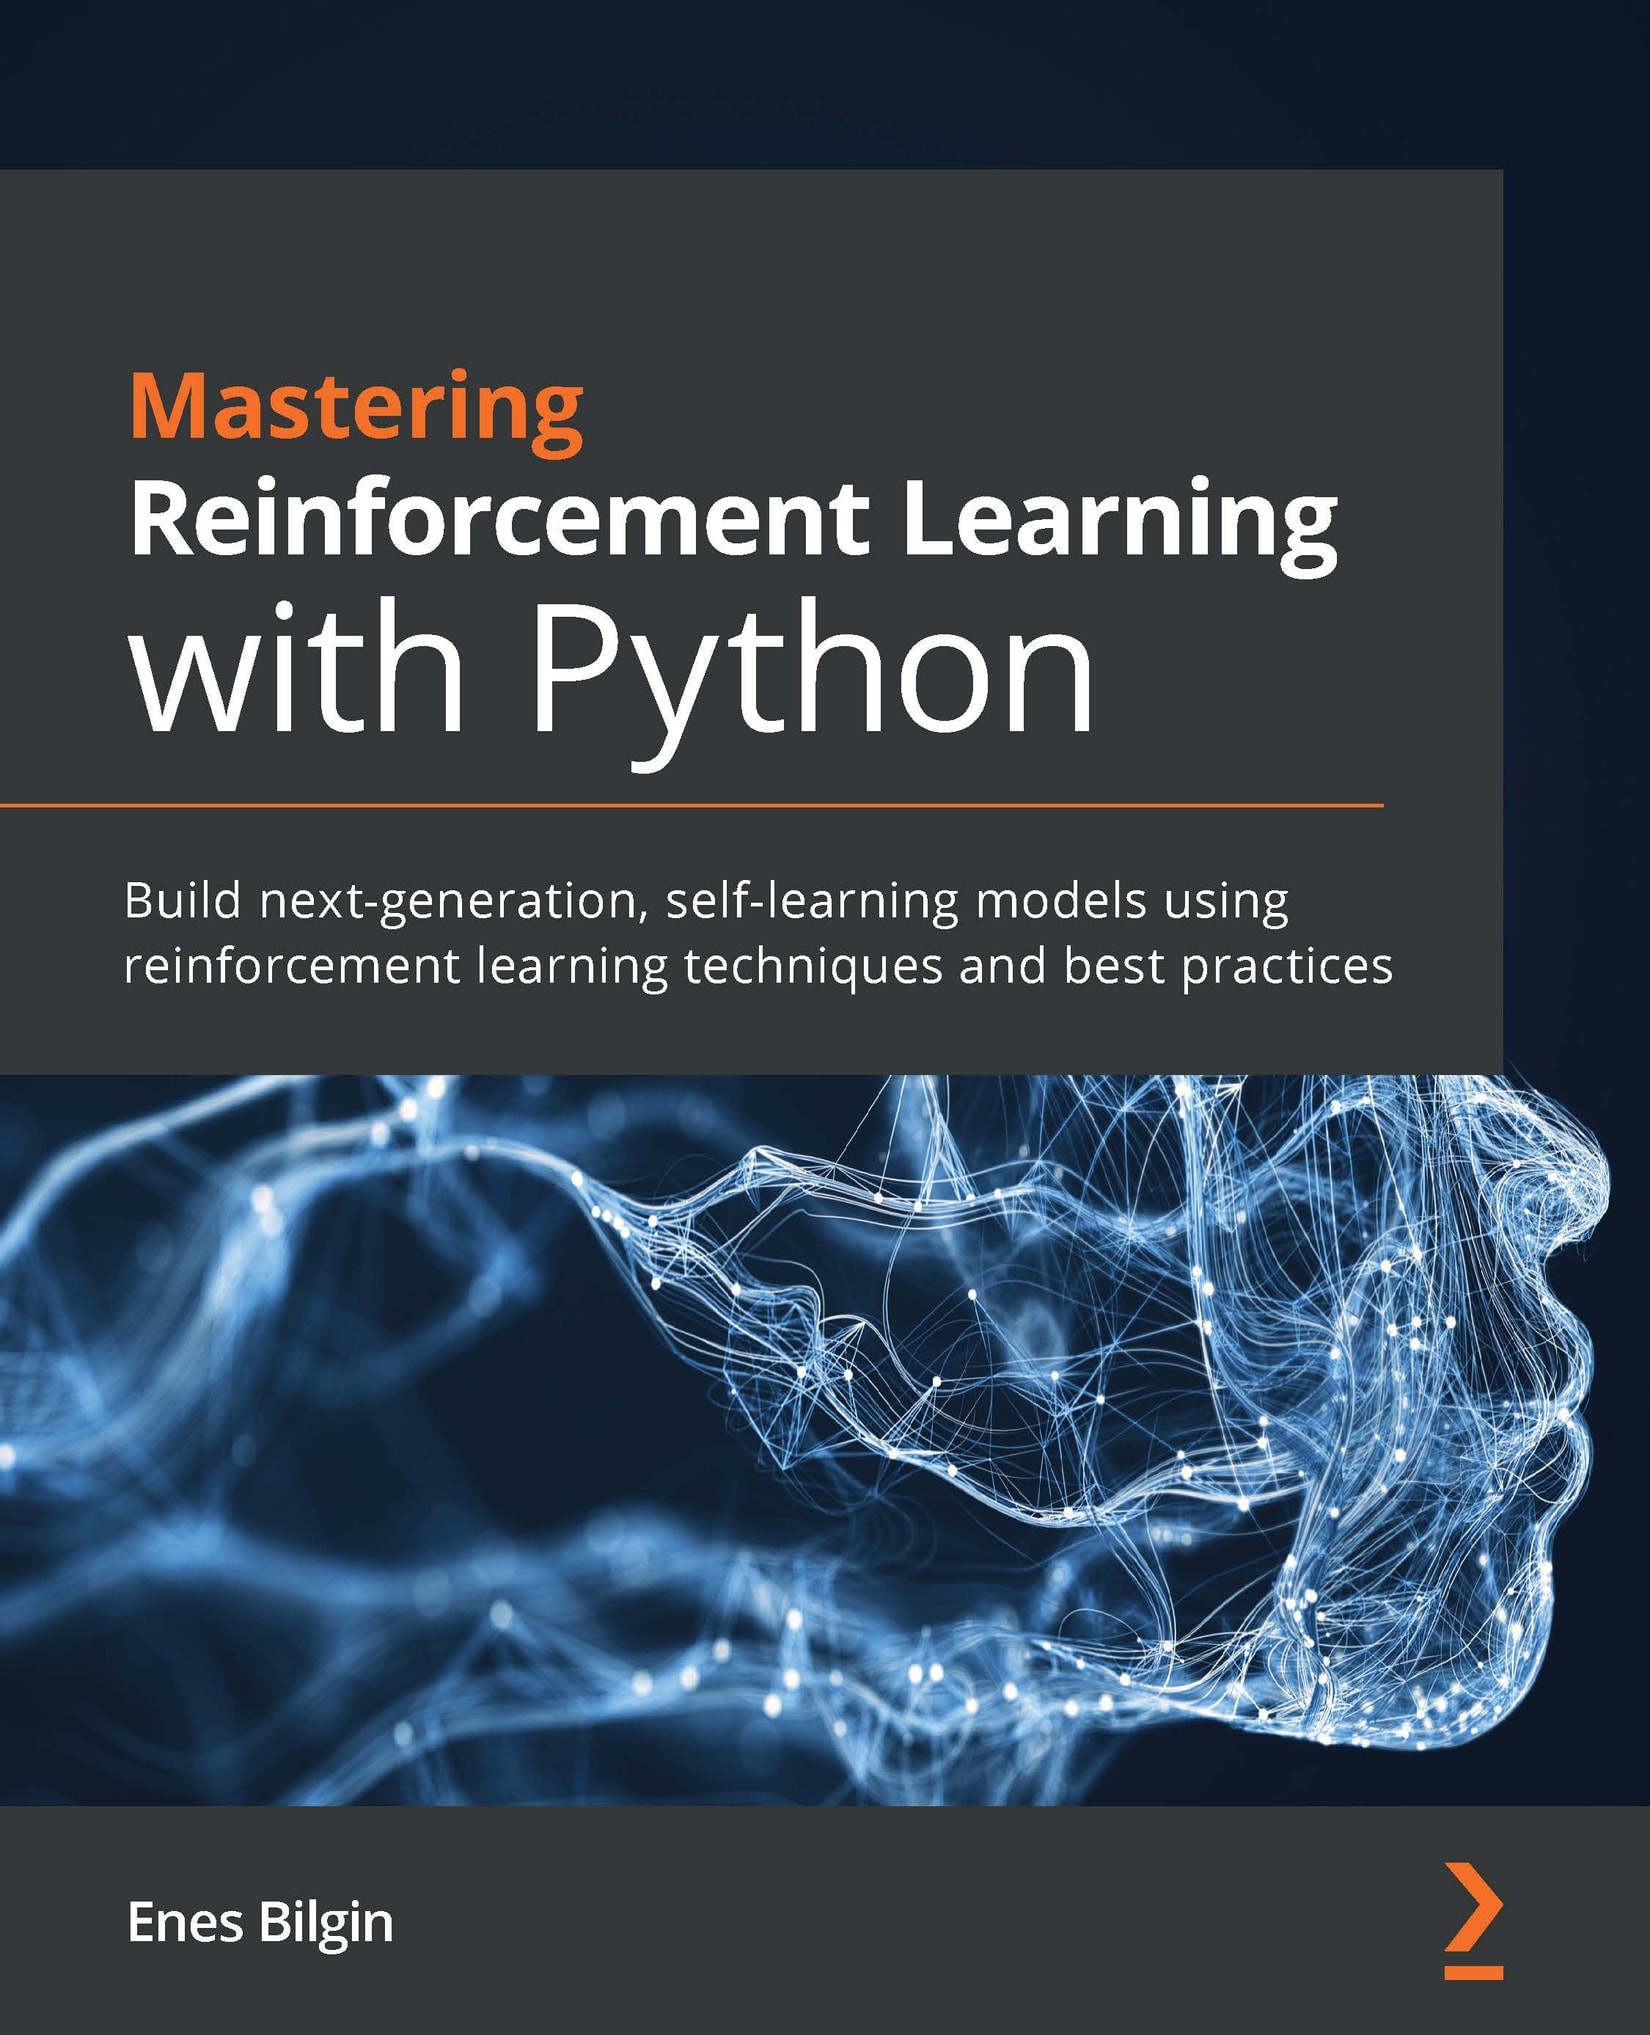 Mastering Reinforcement Learning With Python: Build Next-Generation, Self-Learning Models Using Reinforcement Learning Techniques and Best Practices